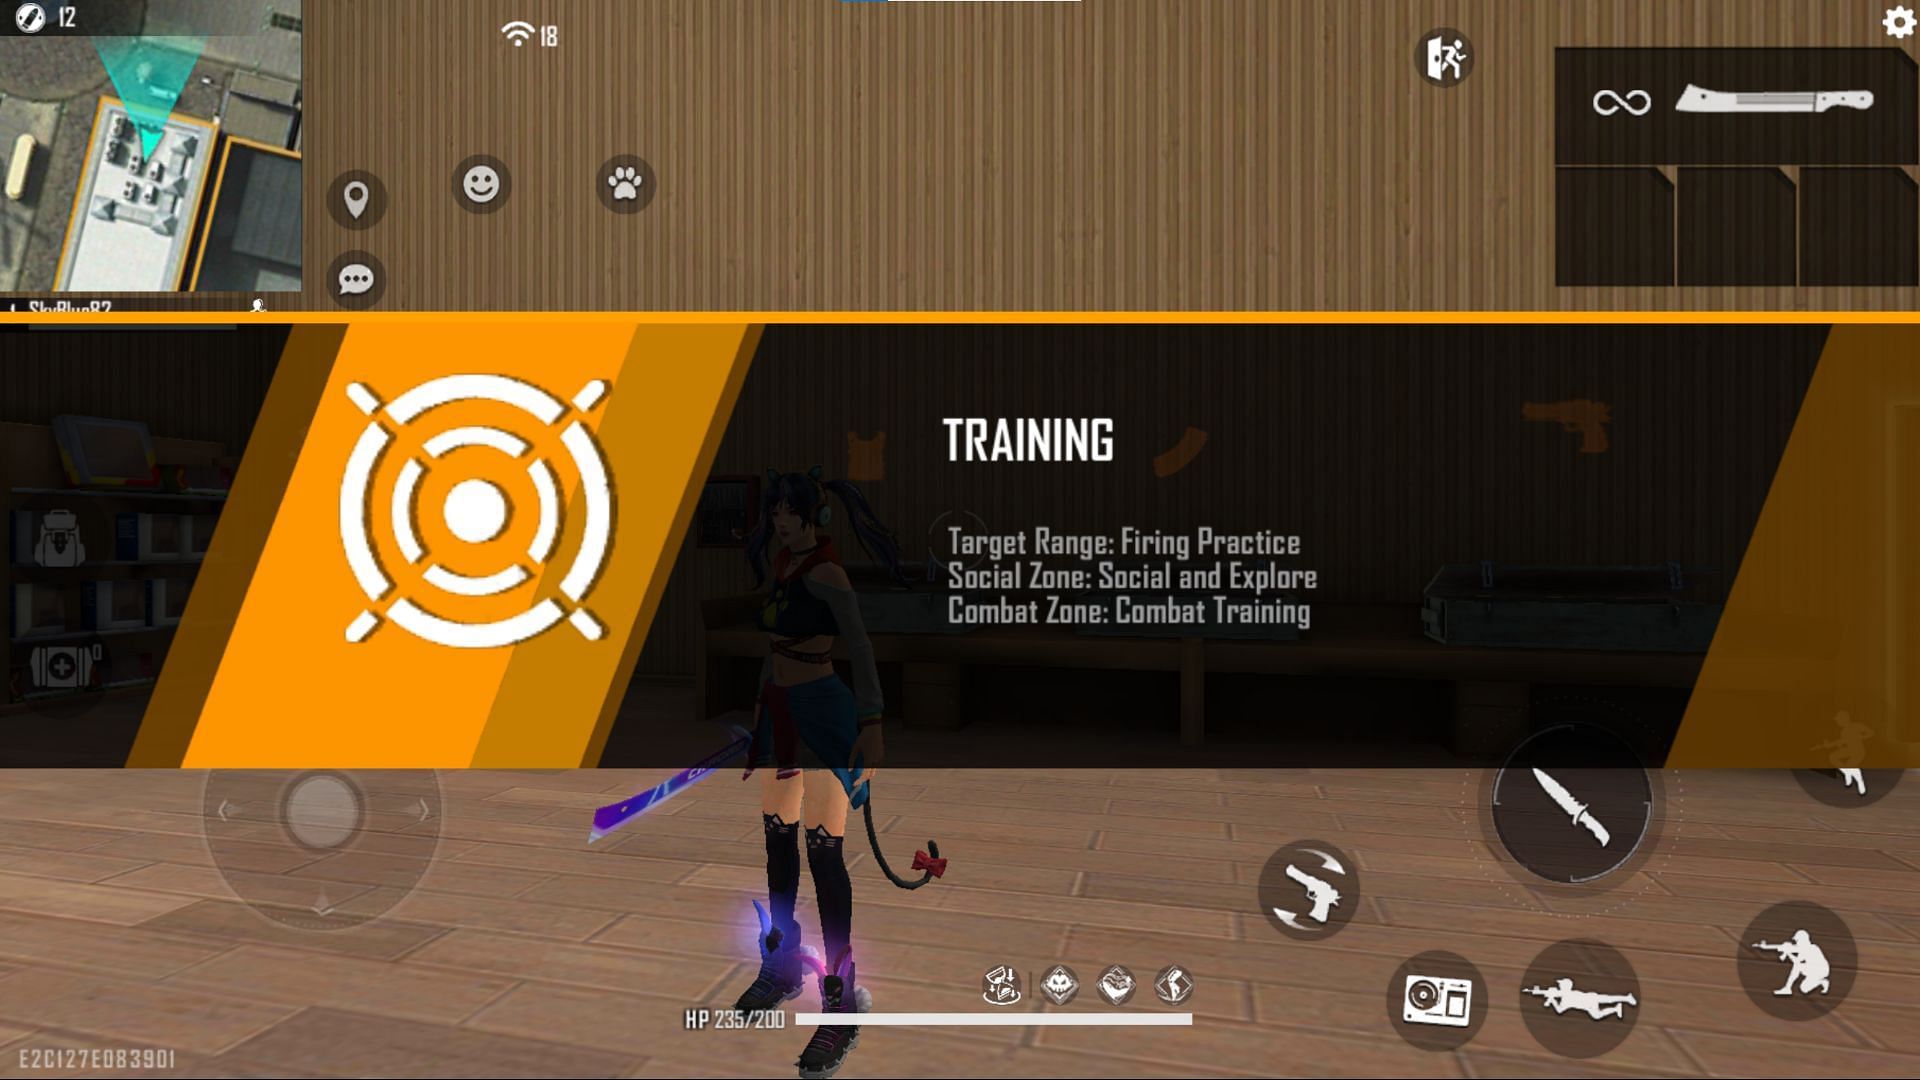 Players can practice in the training mode (Image via Free Fire)